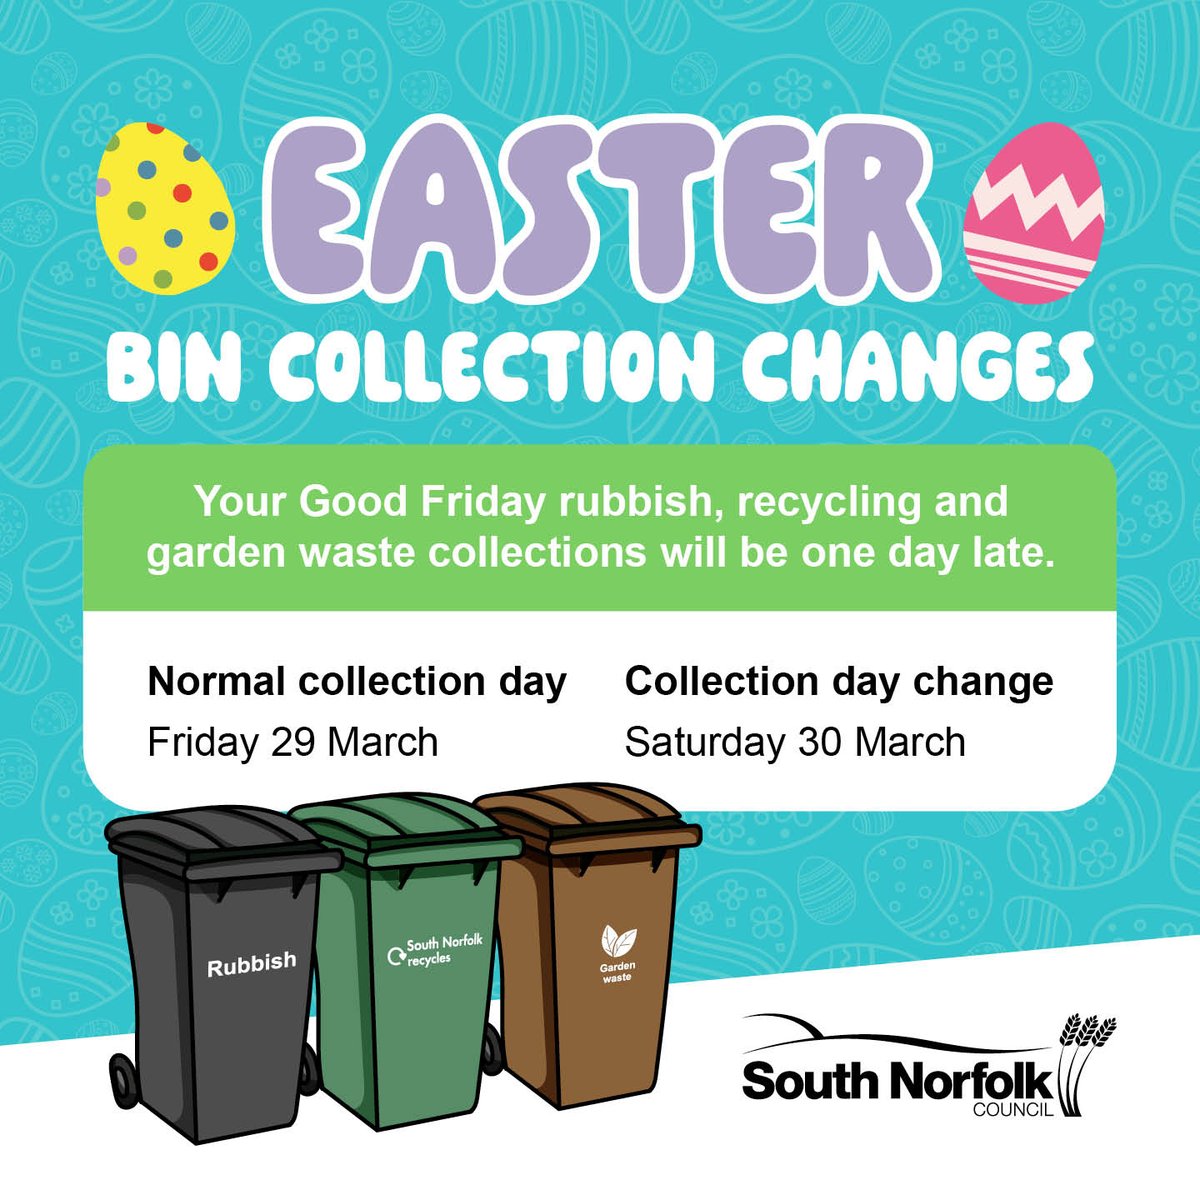 If your rubbish, recycling or garden waste bin is usually collected today, this will be collected tomorrow (Sat 30 March). There will be no other bin collection changes over the Easter period – all bins will be collected on your normal days (including on Easter Monday, 1 April).